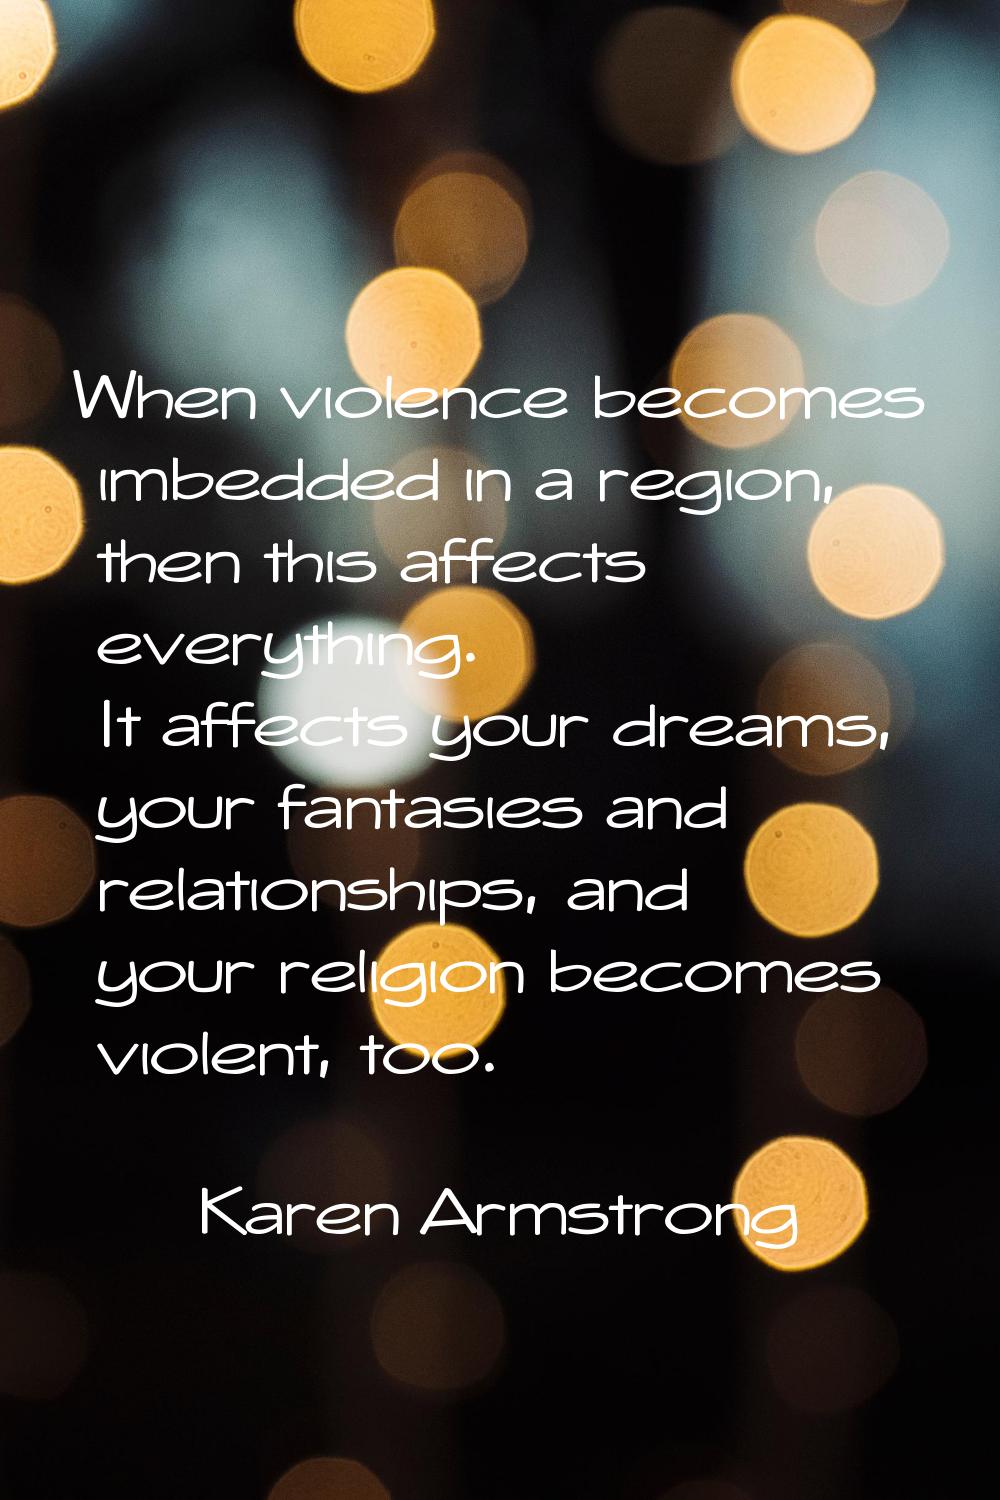 When violence becomes imbedded in a region, then this affects everything. It affects your dreams, y